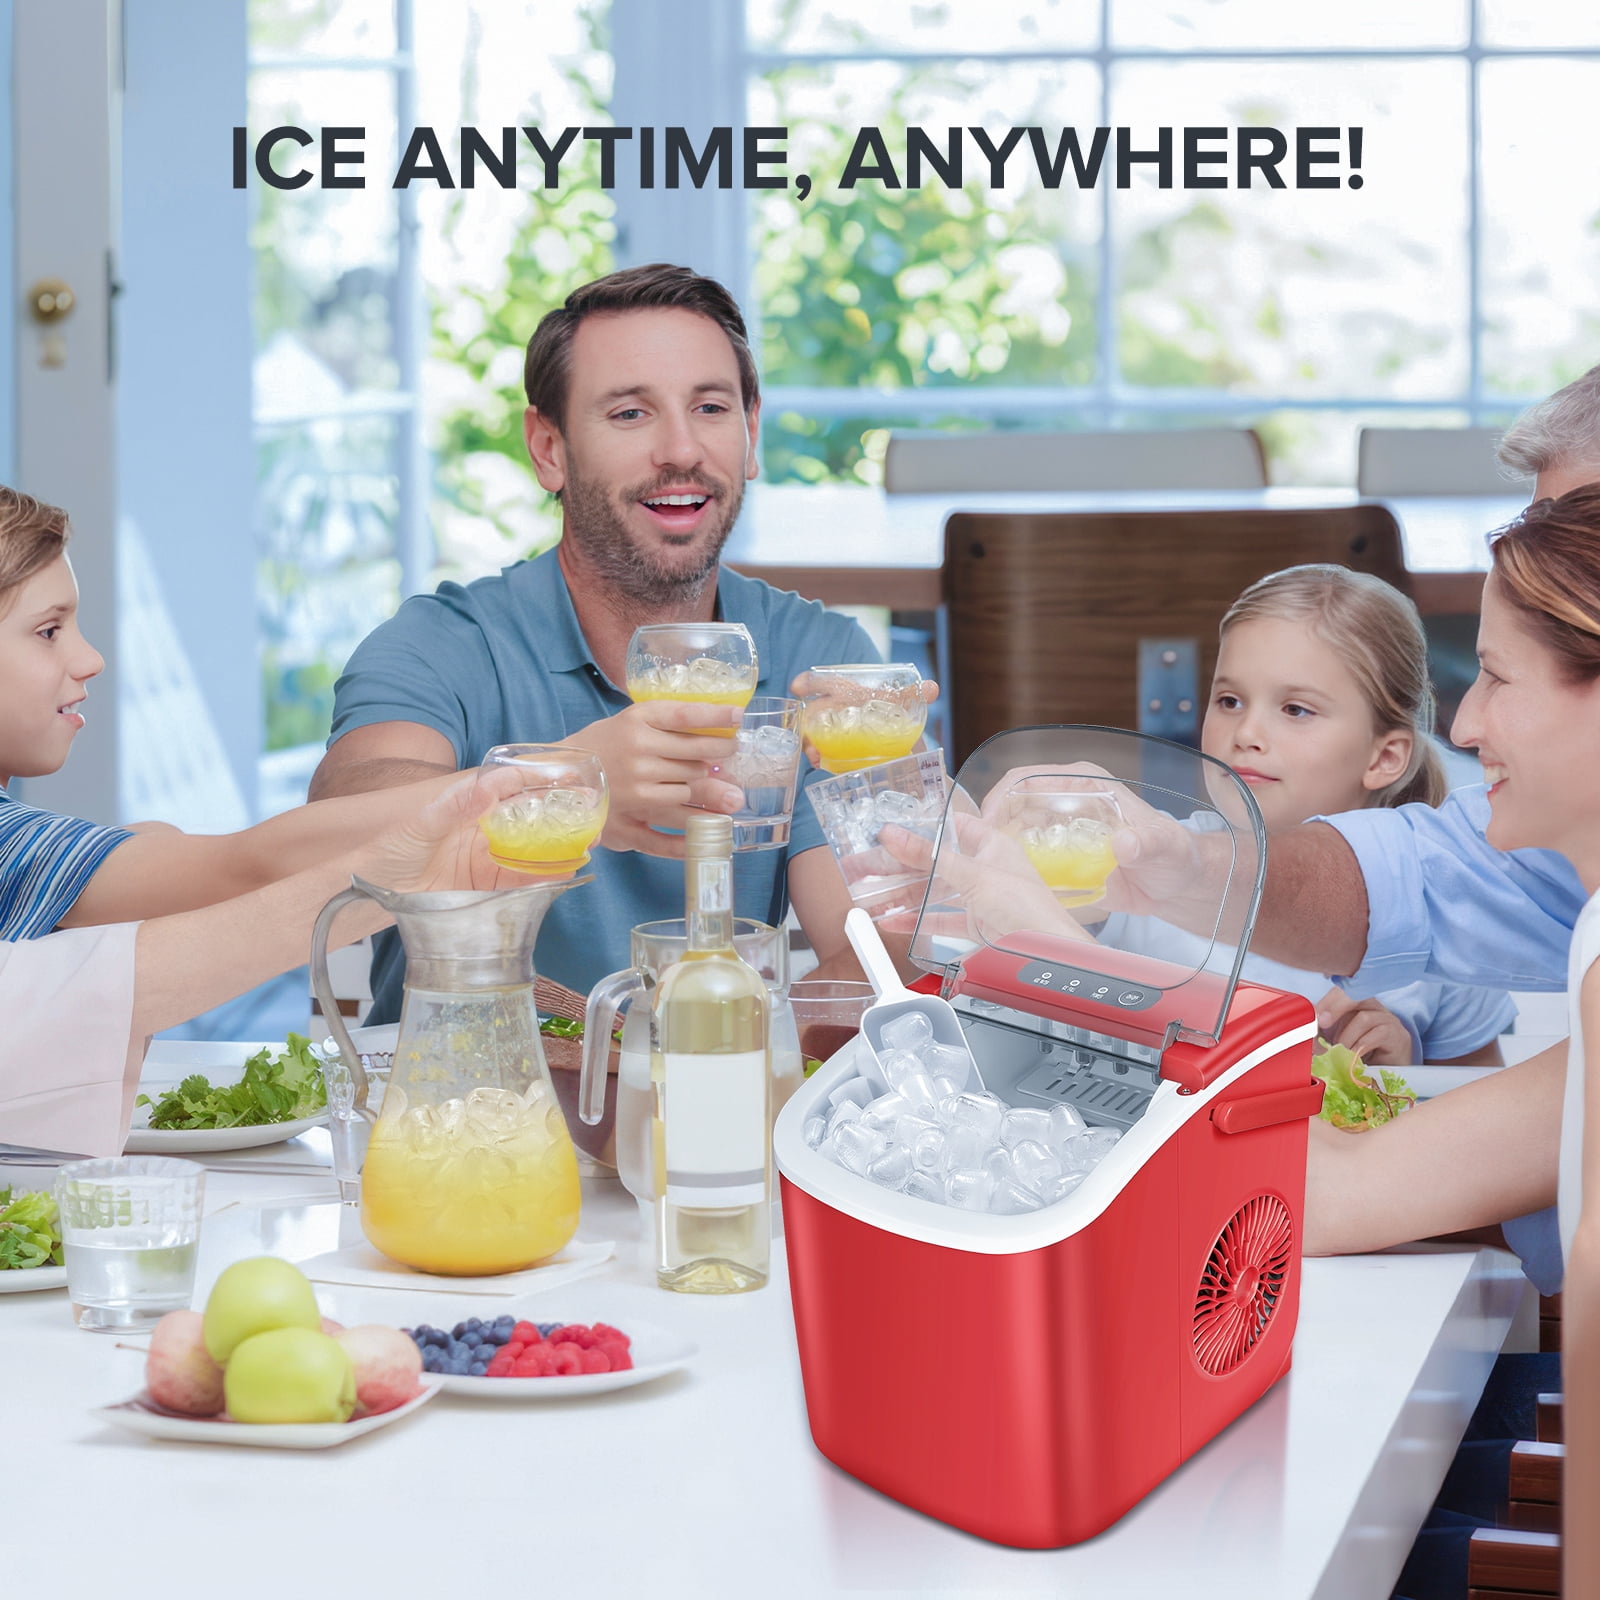 KISSAIR Countertop Ice Maker Portable Ice Machine with Handle, Self-Cl –  Kissair